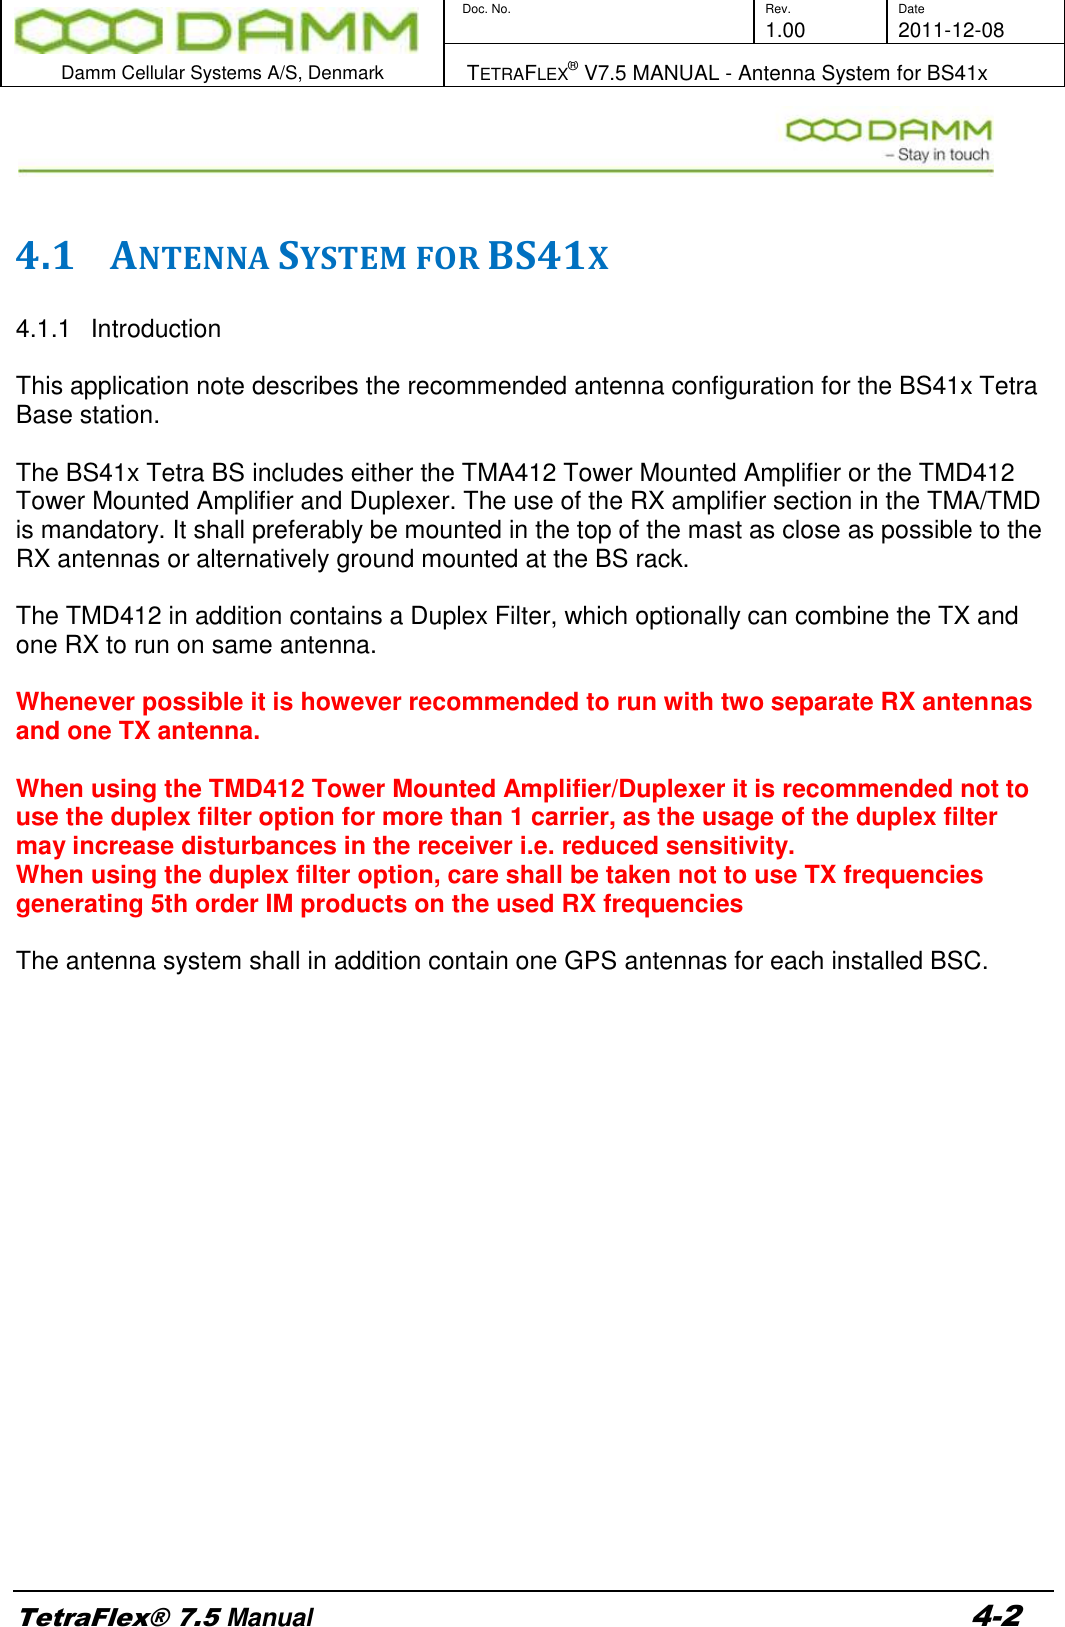        Doc. No. Rev. Date     1.00 2011-12-08  Damm Cellular Systems A/S, Denmark   TETRAFLEX® V7.5 MANUAL - Antenna System for BS41x  TetraFlex® 7.5 Manual 4-2   4.1 ANTENNA SYSTEM FOR BS41X  4.1.1  Introduction  This application note describes the recommended antenna configuration for the BS41x Tetra Base station.  The BS41x Tetra BS includes either the TMA412 Tower Mounted Amplifier or the TMD412 Tower Mounted Amplifier and Duplexer. The use of the RX amplifier section in the TMA/TMD is mandatory. It shall preferably be mounted in the top of the mast as close as possible to the RX antennas or alternatively ground mounted at the BS rack.  The TMD412 in addition contains a Duplex Filter, which optionally can combine the TX and one RX to run on same antenna.    Whenever possible it is however recommended to run with two separate RX antennas and one TX antenna.  When using the TMD412 Tower Mounted Amplifier/Duplexer it is recommended not to use the duplex filter option for more than 1 carrier, as the usage of the duplex filter may increase disturbances in the receiver i.e. reduced sensitivity. When using the duplex filter option, care shall be taken not to use TX frequencies generating 5th order IM products on the used RX frequencies   The antenna system shall in addition contain one GPS antennas for each installed BSC.                       